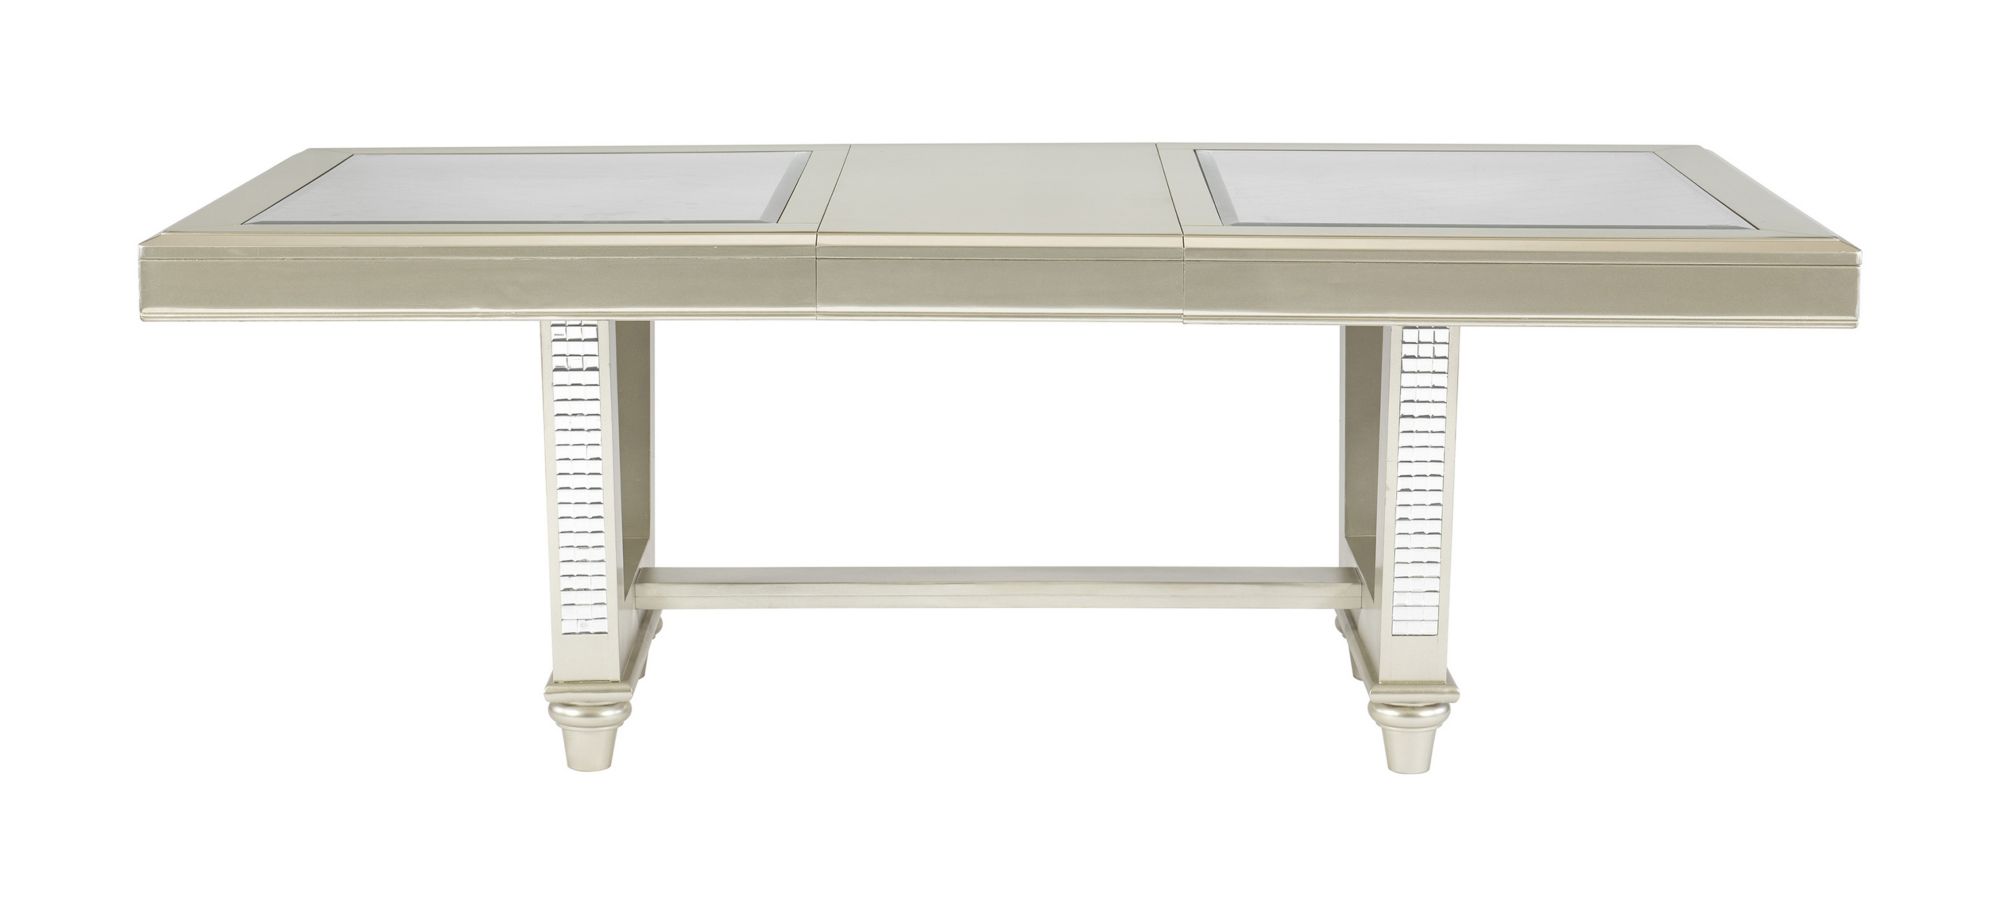 Lovell Dining Room Table in champagne by Homelegance